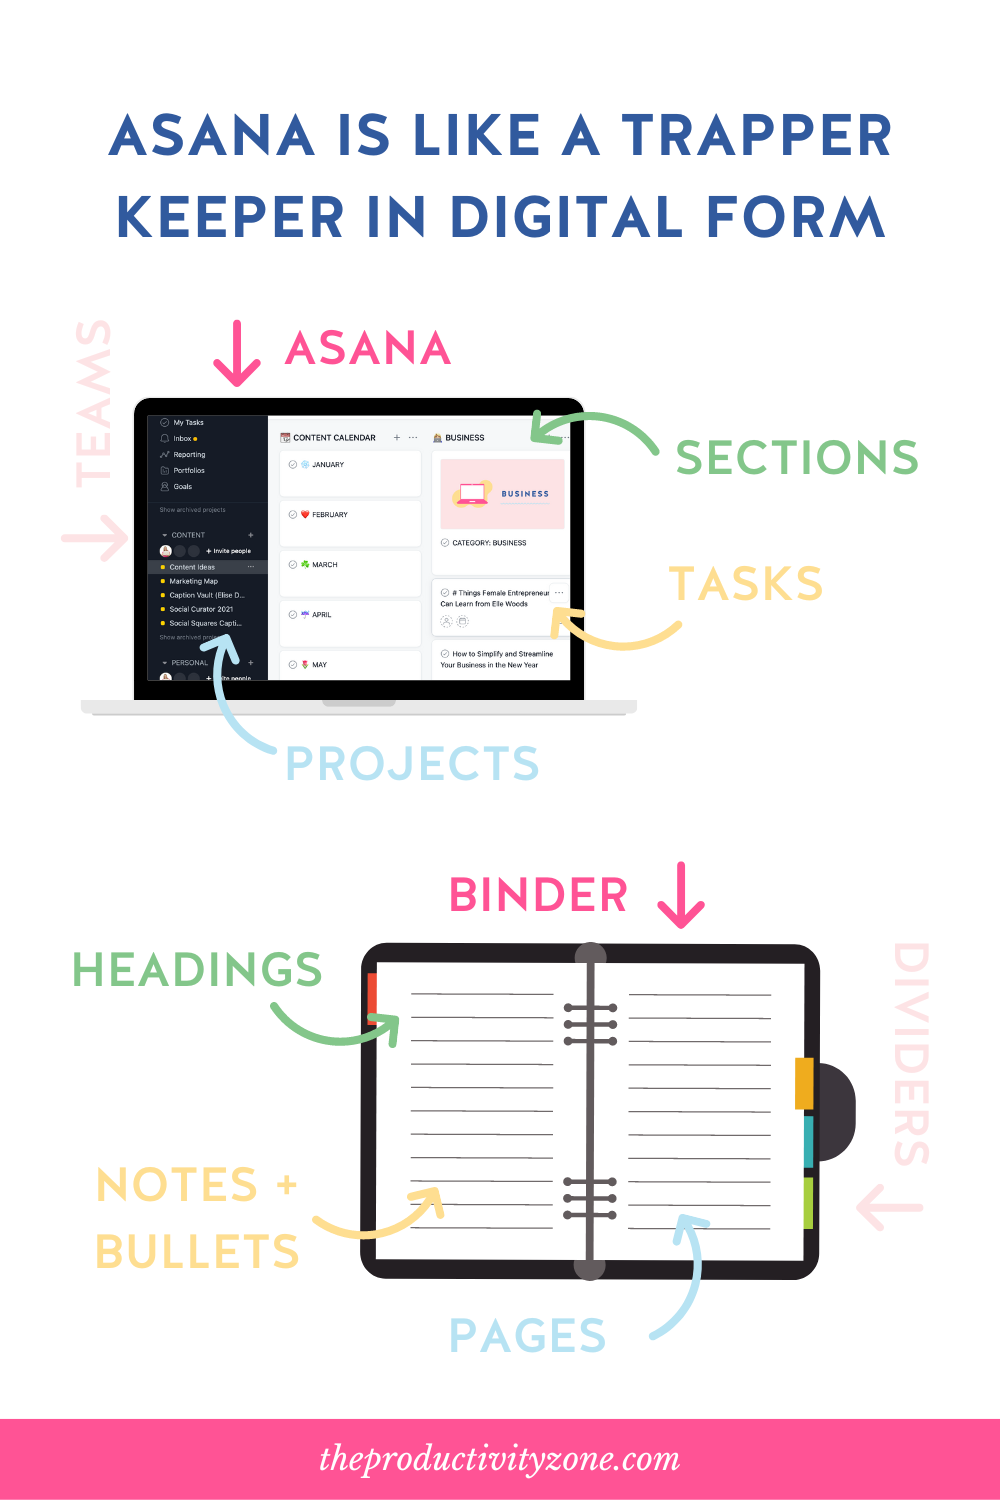 laptop mockup showing the breakdown of Asana, teams, projects, sections, and tasks on the top and a trapper keeper mockup showing the breakdown of binder, dividers, pages, headings, and bullet points on the bottom to demonstrate how Asana is like a trapper keeper in digital form